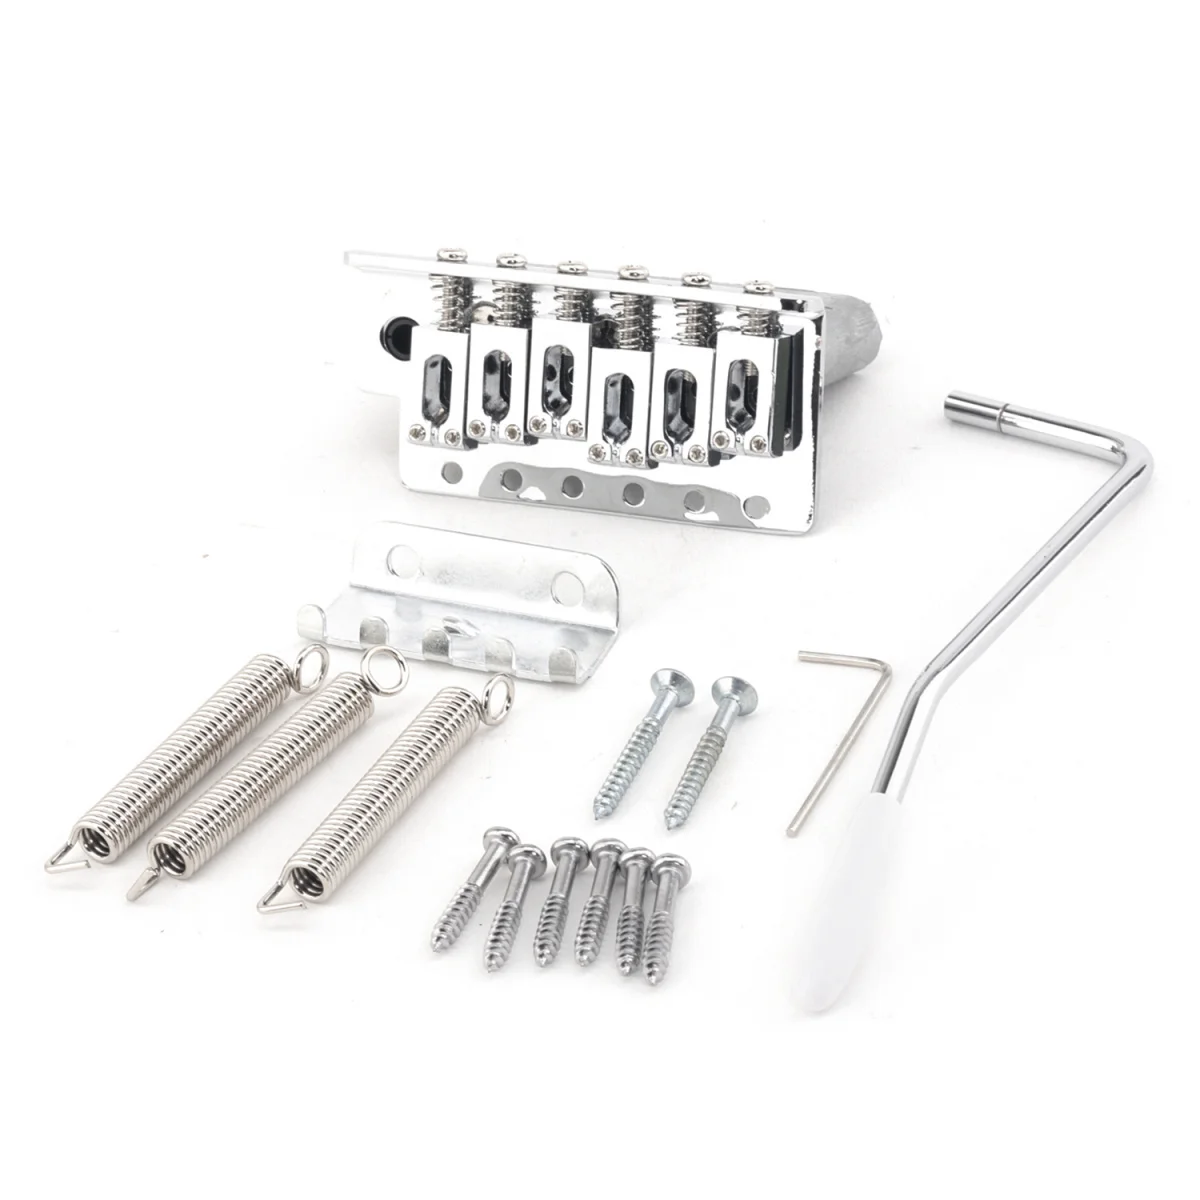 

Musiclily Pro 54mm Tremolo Bridge Assembly Set for Strat Style Electric Guitar, Chrome